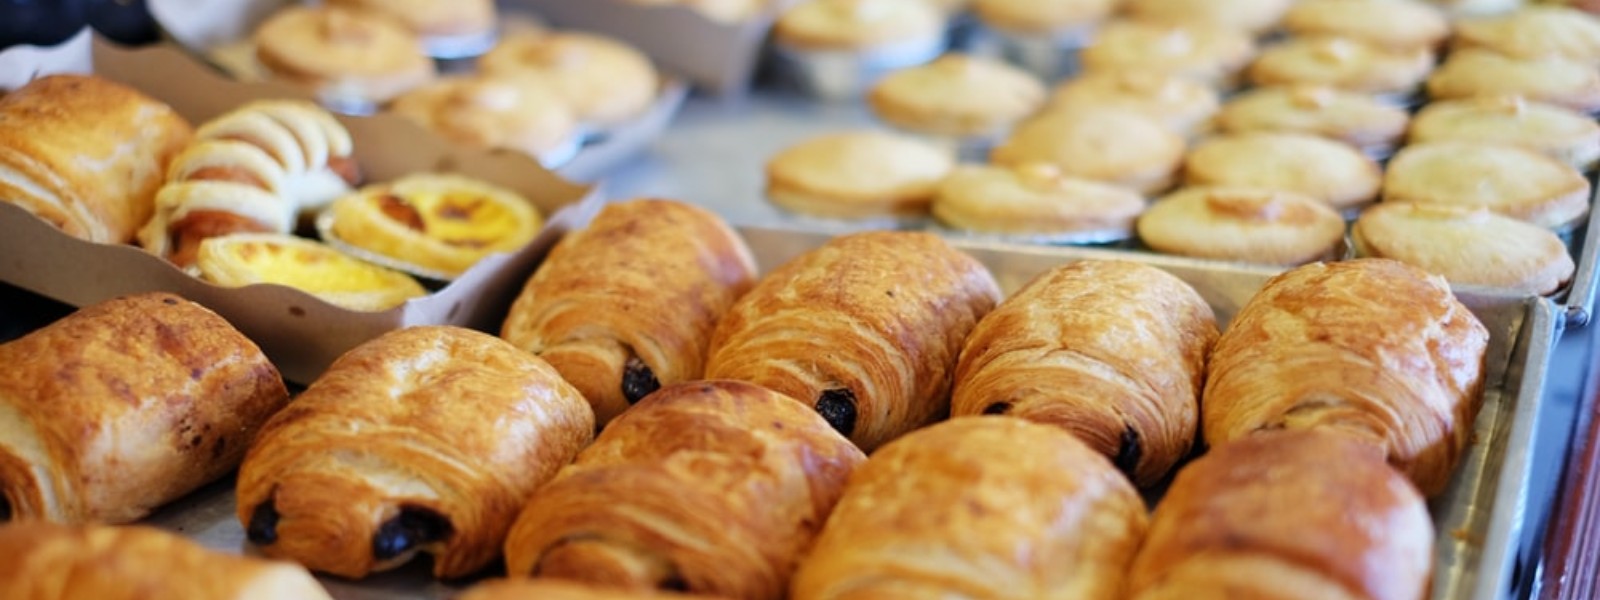 Prices of bakery products to be increased – Bakery Owners